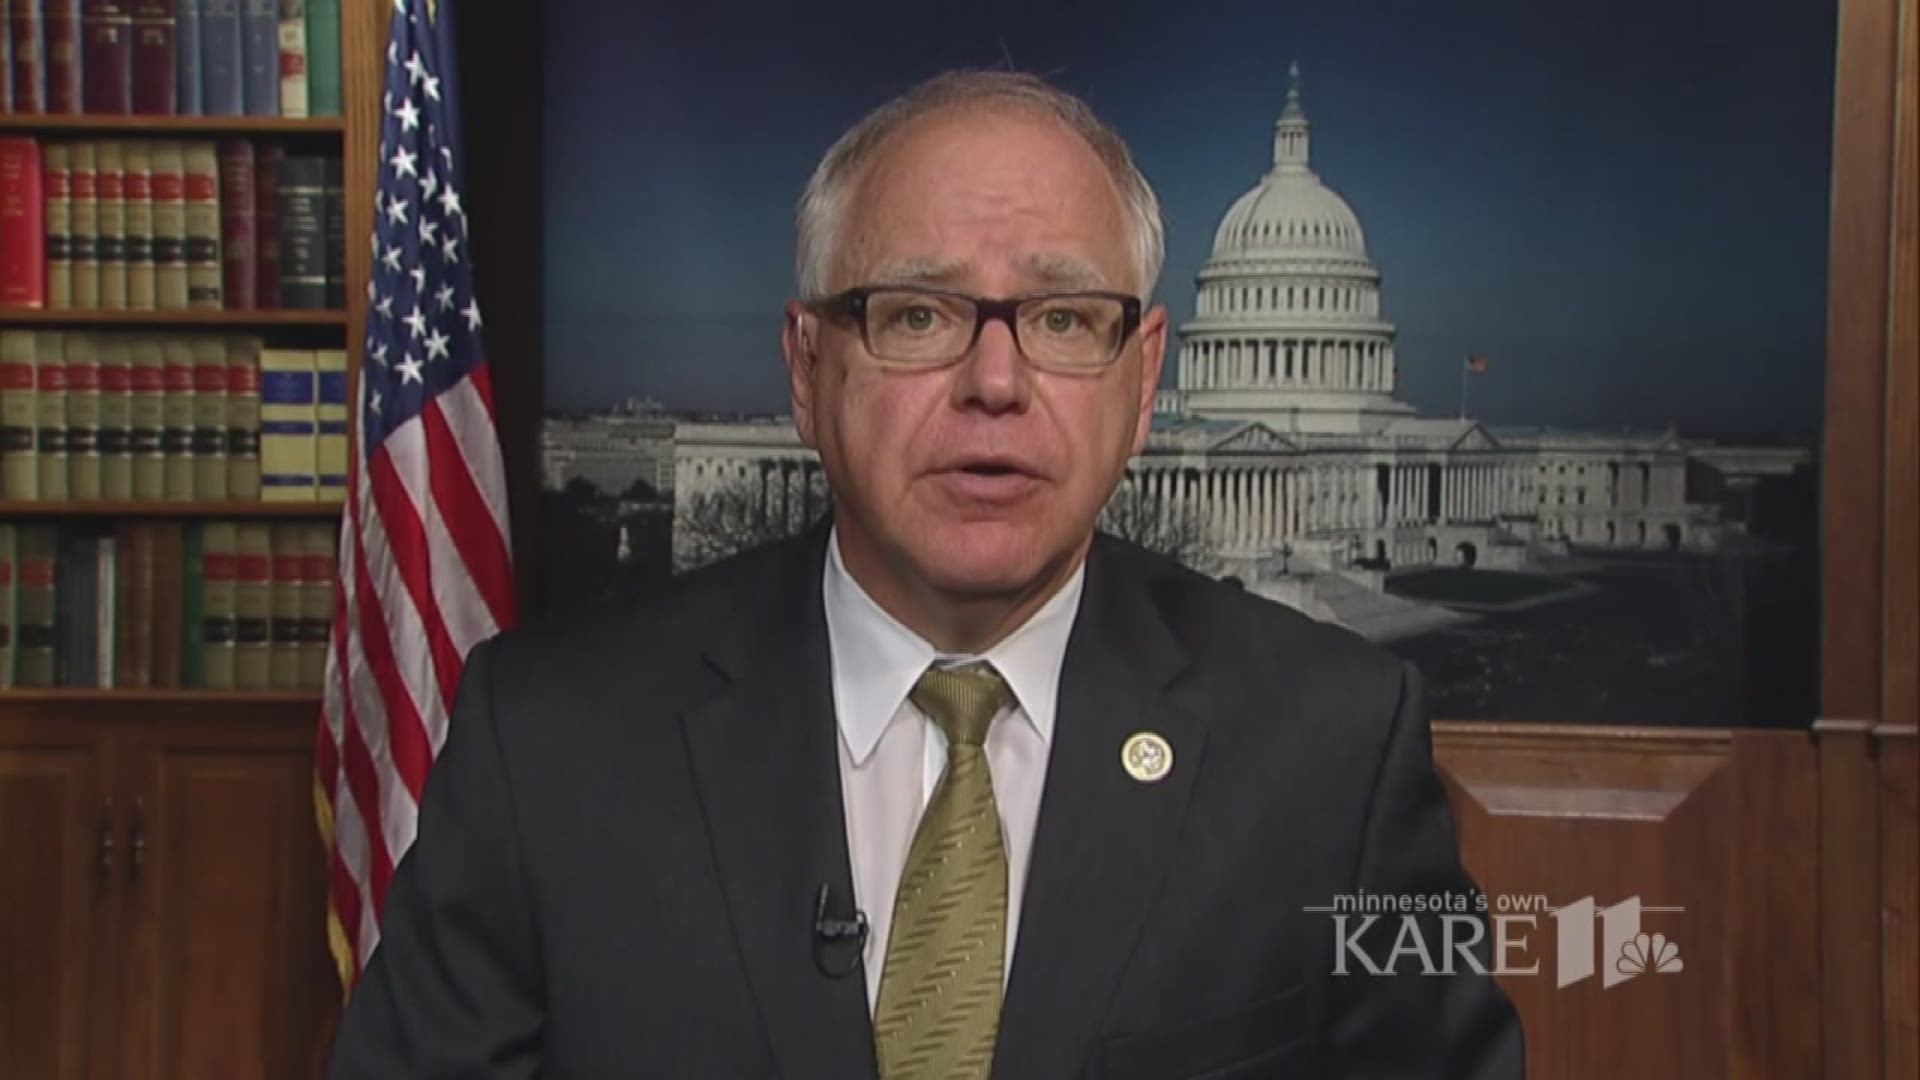 Congressman Tim Walz (D-MN) said he is asking the VA Inspector General to open an investigation into how the Department of Veterans Affairs (VA) is handling claims for emergency medical care, after a KARE 11 investigation. http://kare11.tv/2wj0yWx